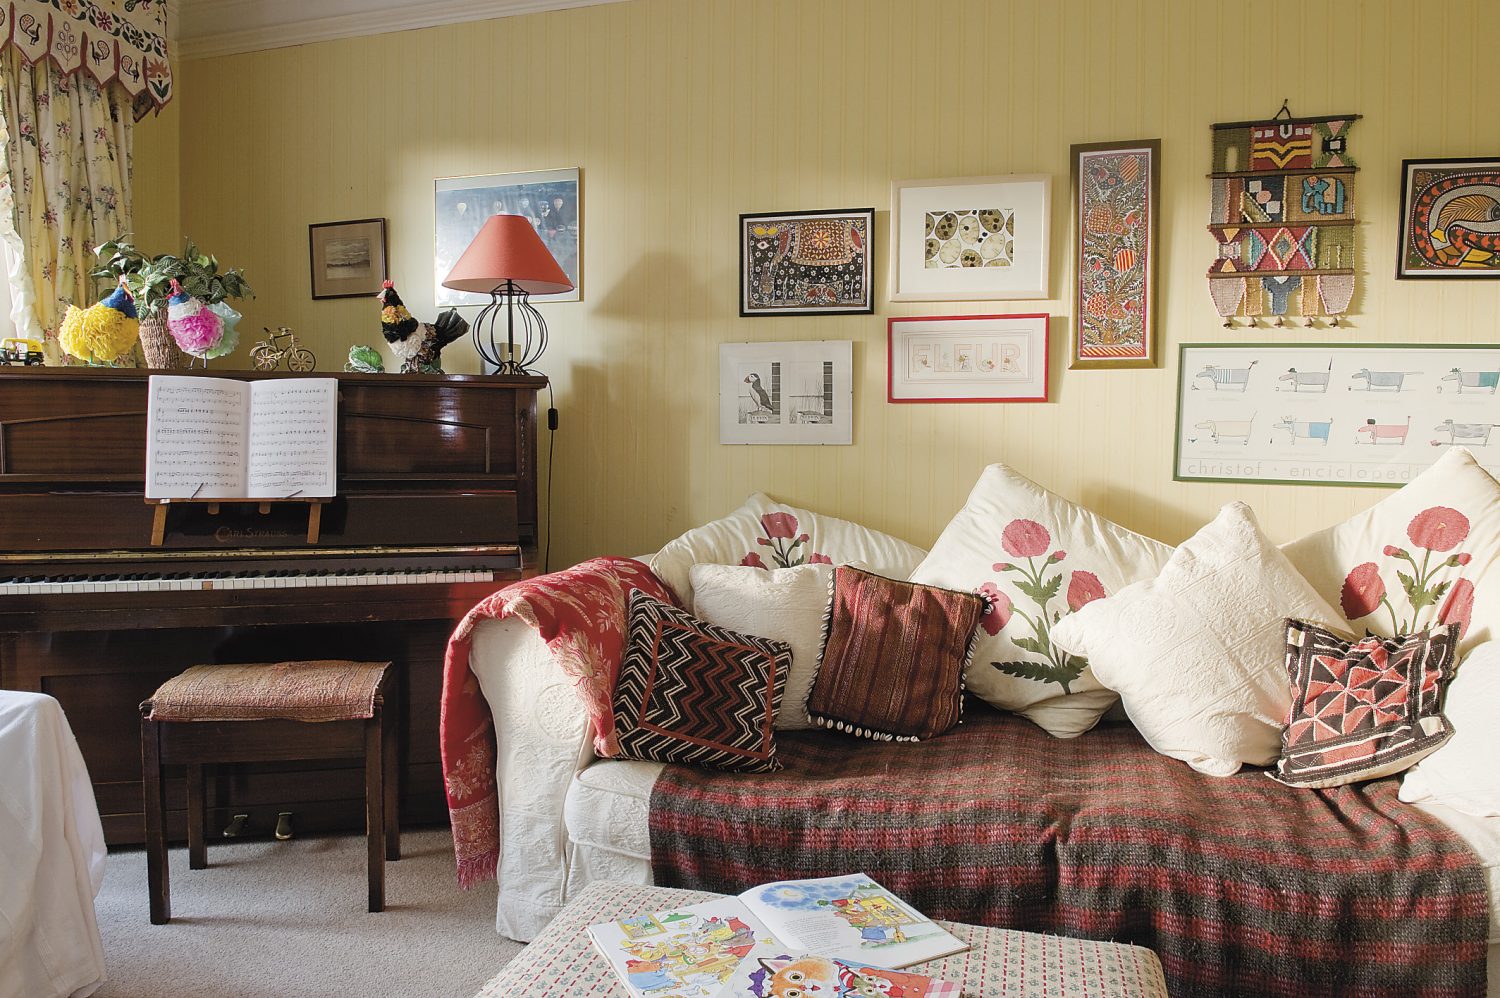 cushions, throws and artworks gathered on trips overseas add a splash of Eastern colour to a traditional Wealden hall house